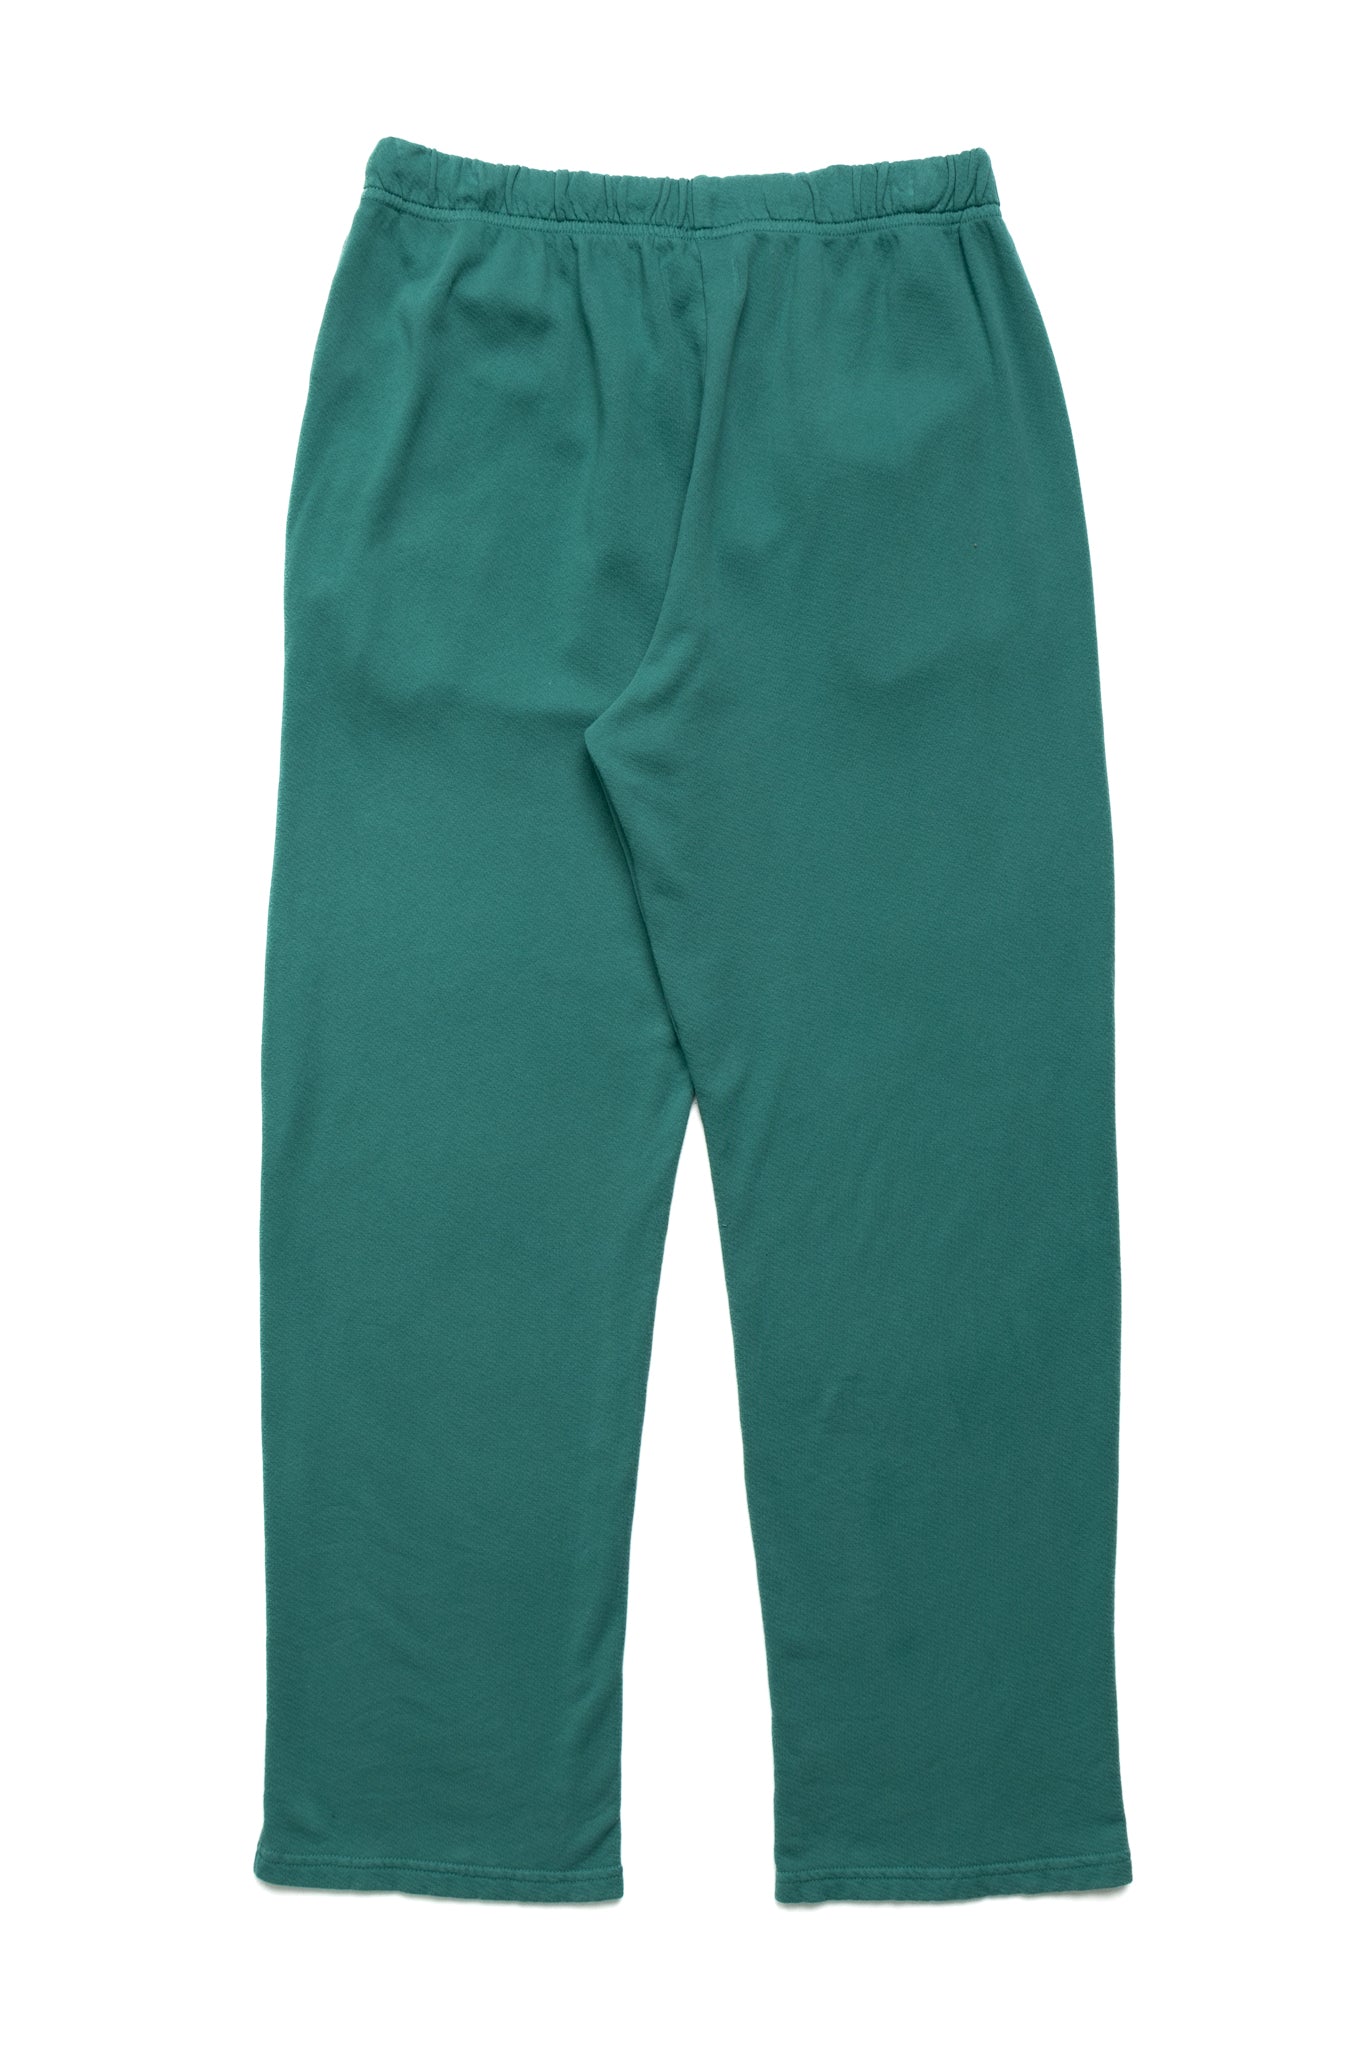 Classic Pant French Terry - Washed Rainforest